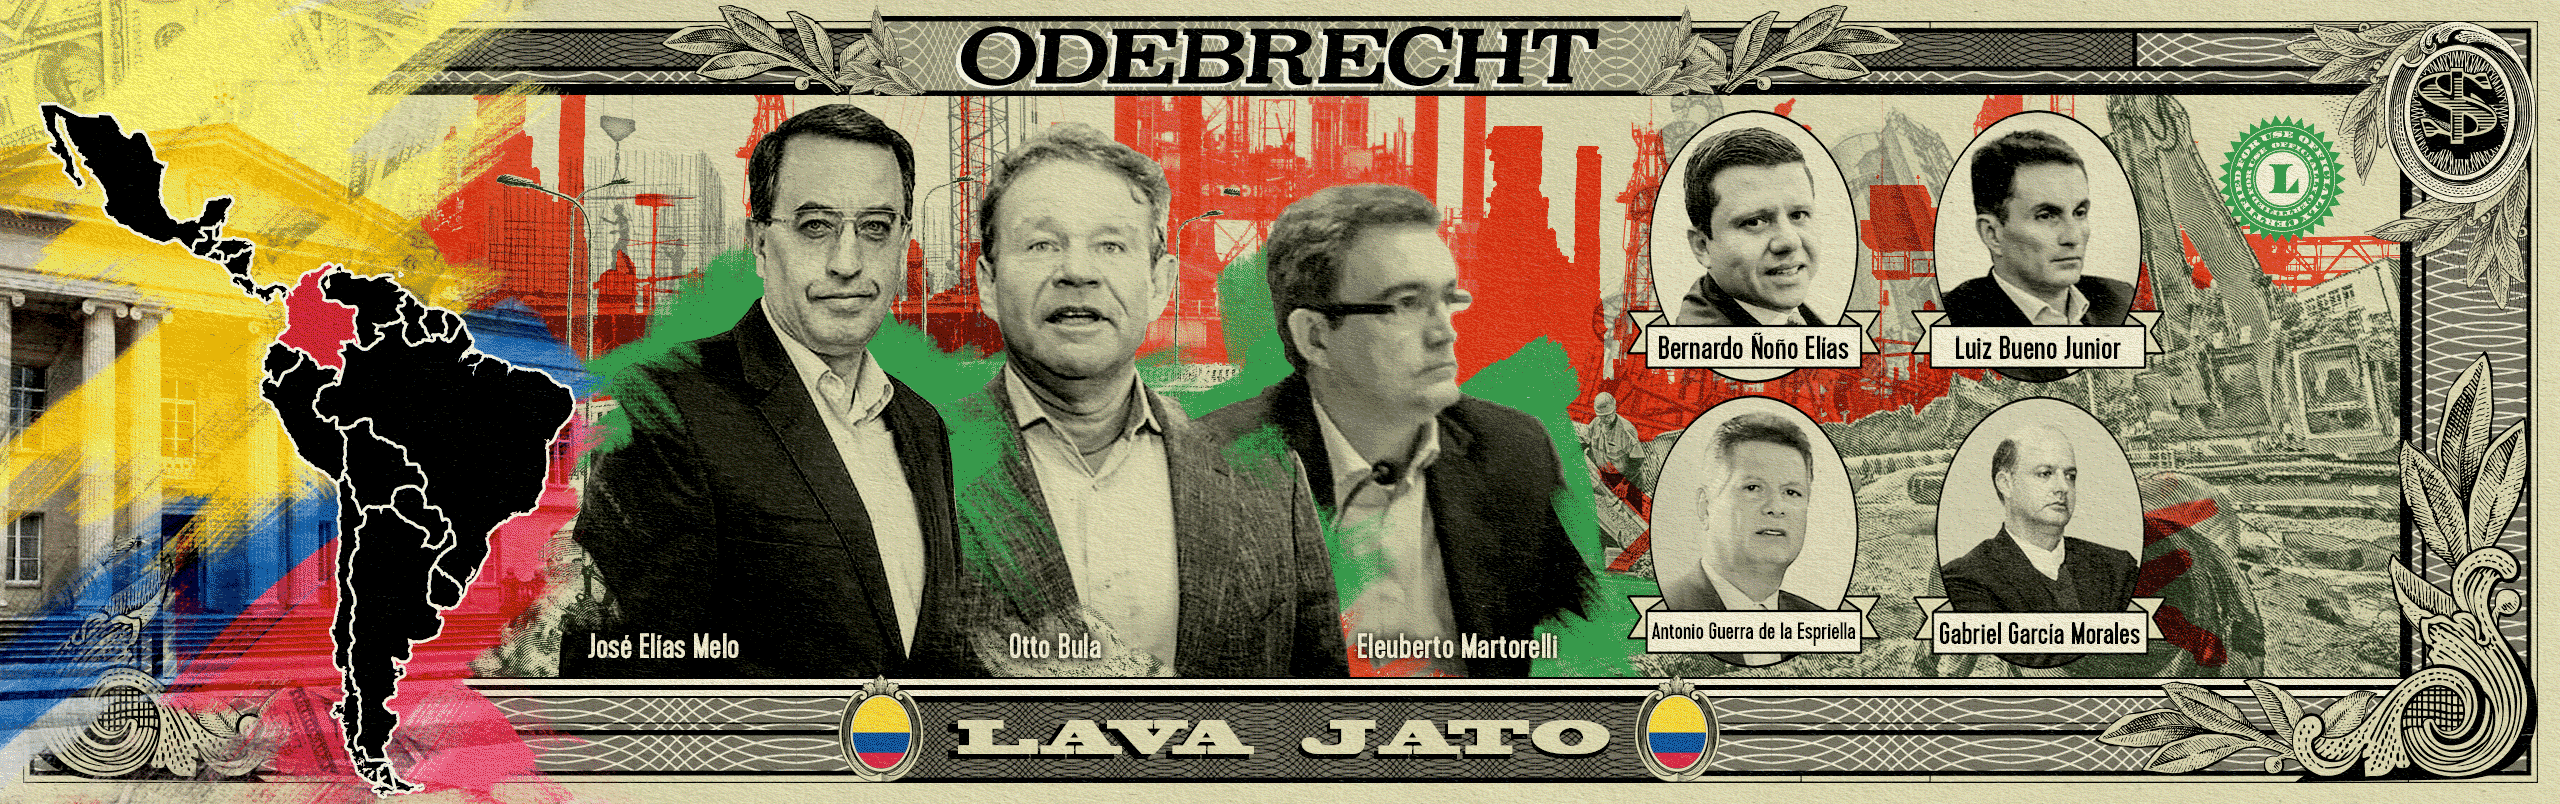 odebrecht colombia